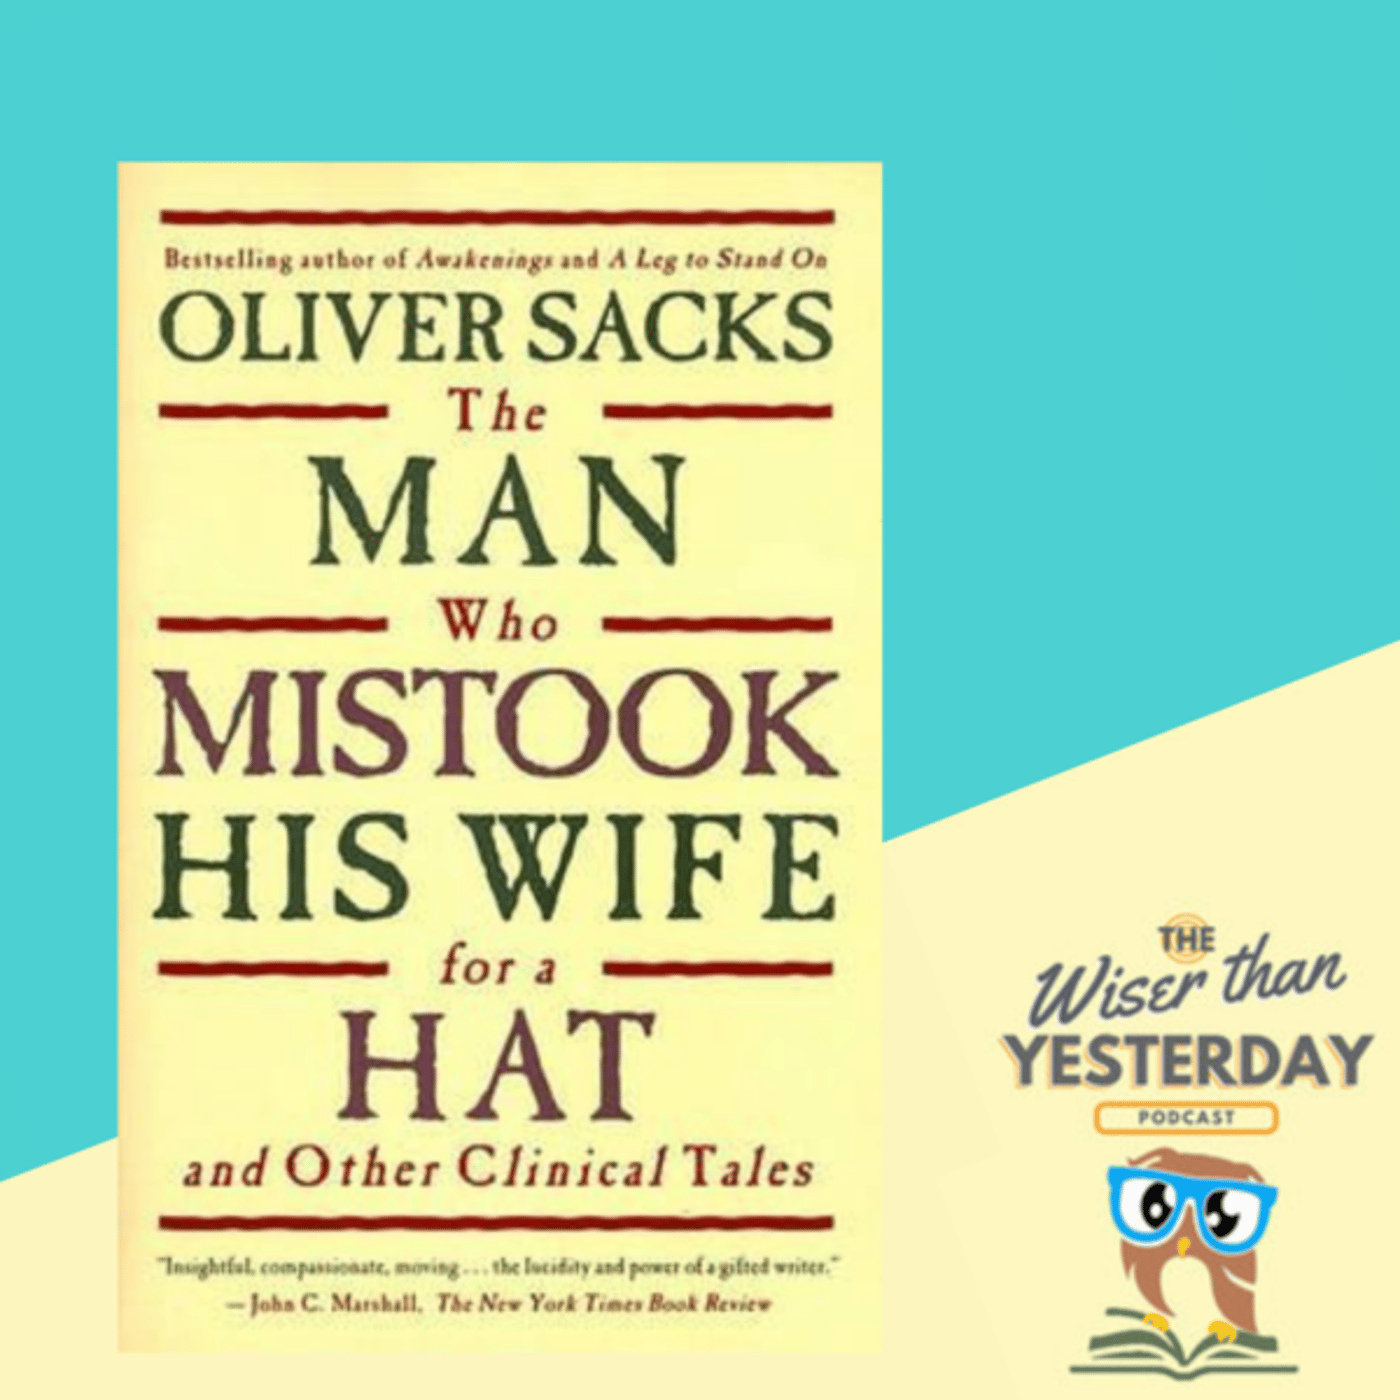 NEURODIVERSITY: The Man Who Mistook His Wife and Other Clinical Tales by Oliver Sacks